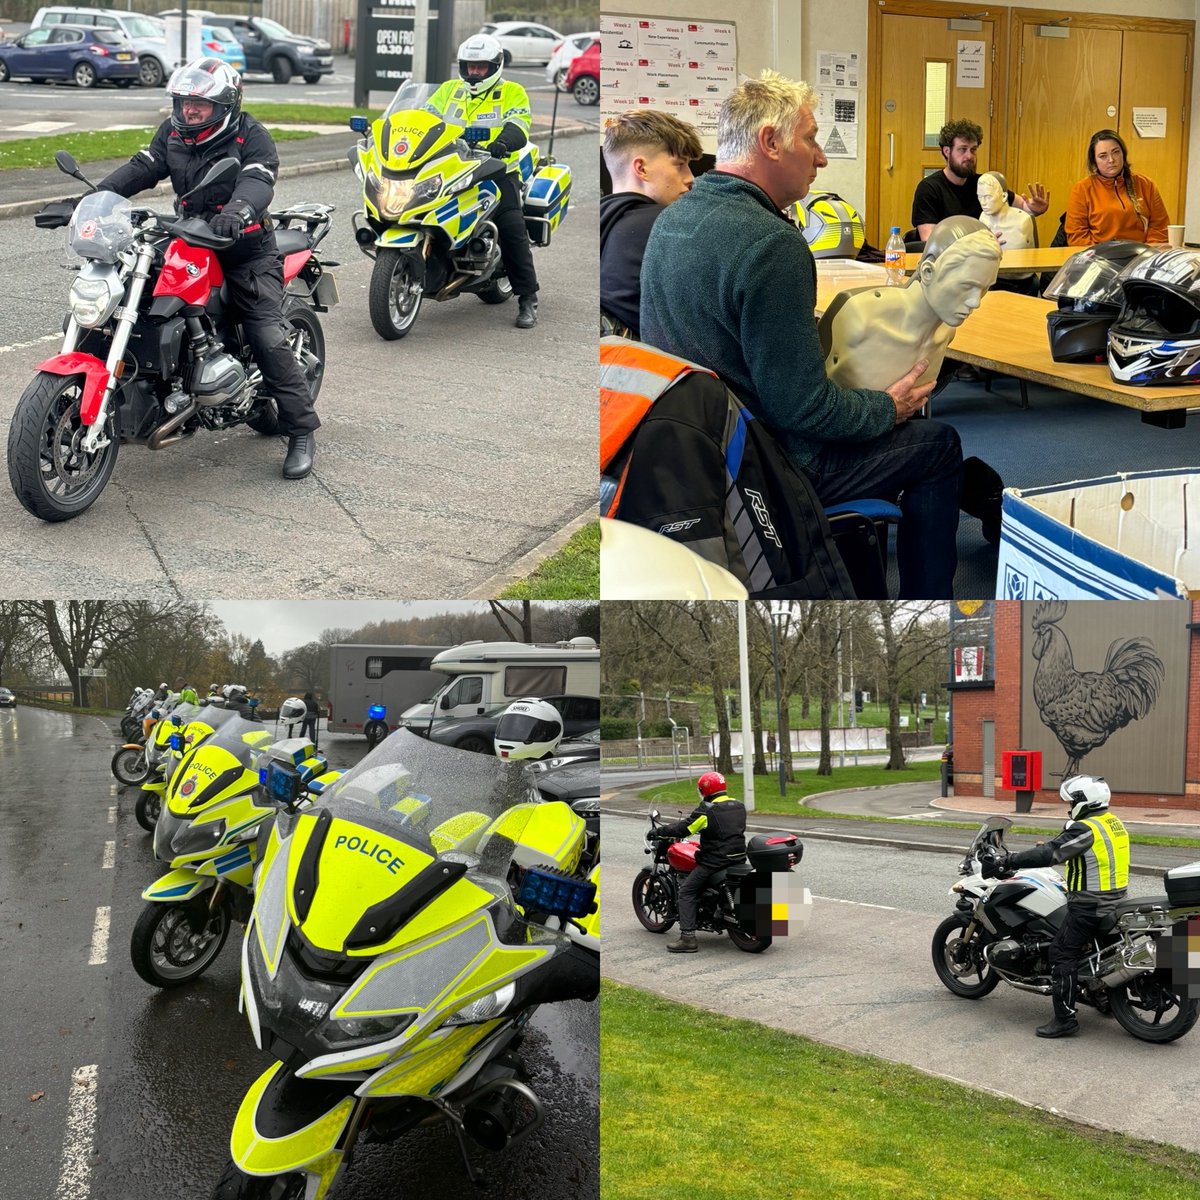 Despite some challenging weather conditions 14 motorcyclists attended our @BikeSafeUK workshop at Accrington yesterday learning new skills around rider safety and first aid. Great to see the take up for this years courses so far 👍🏻 🏍️